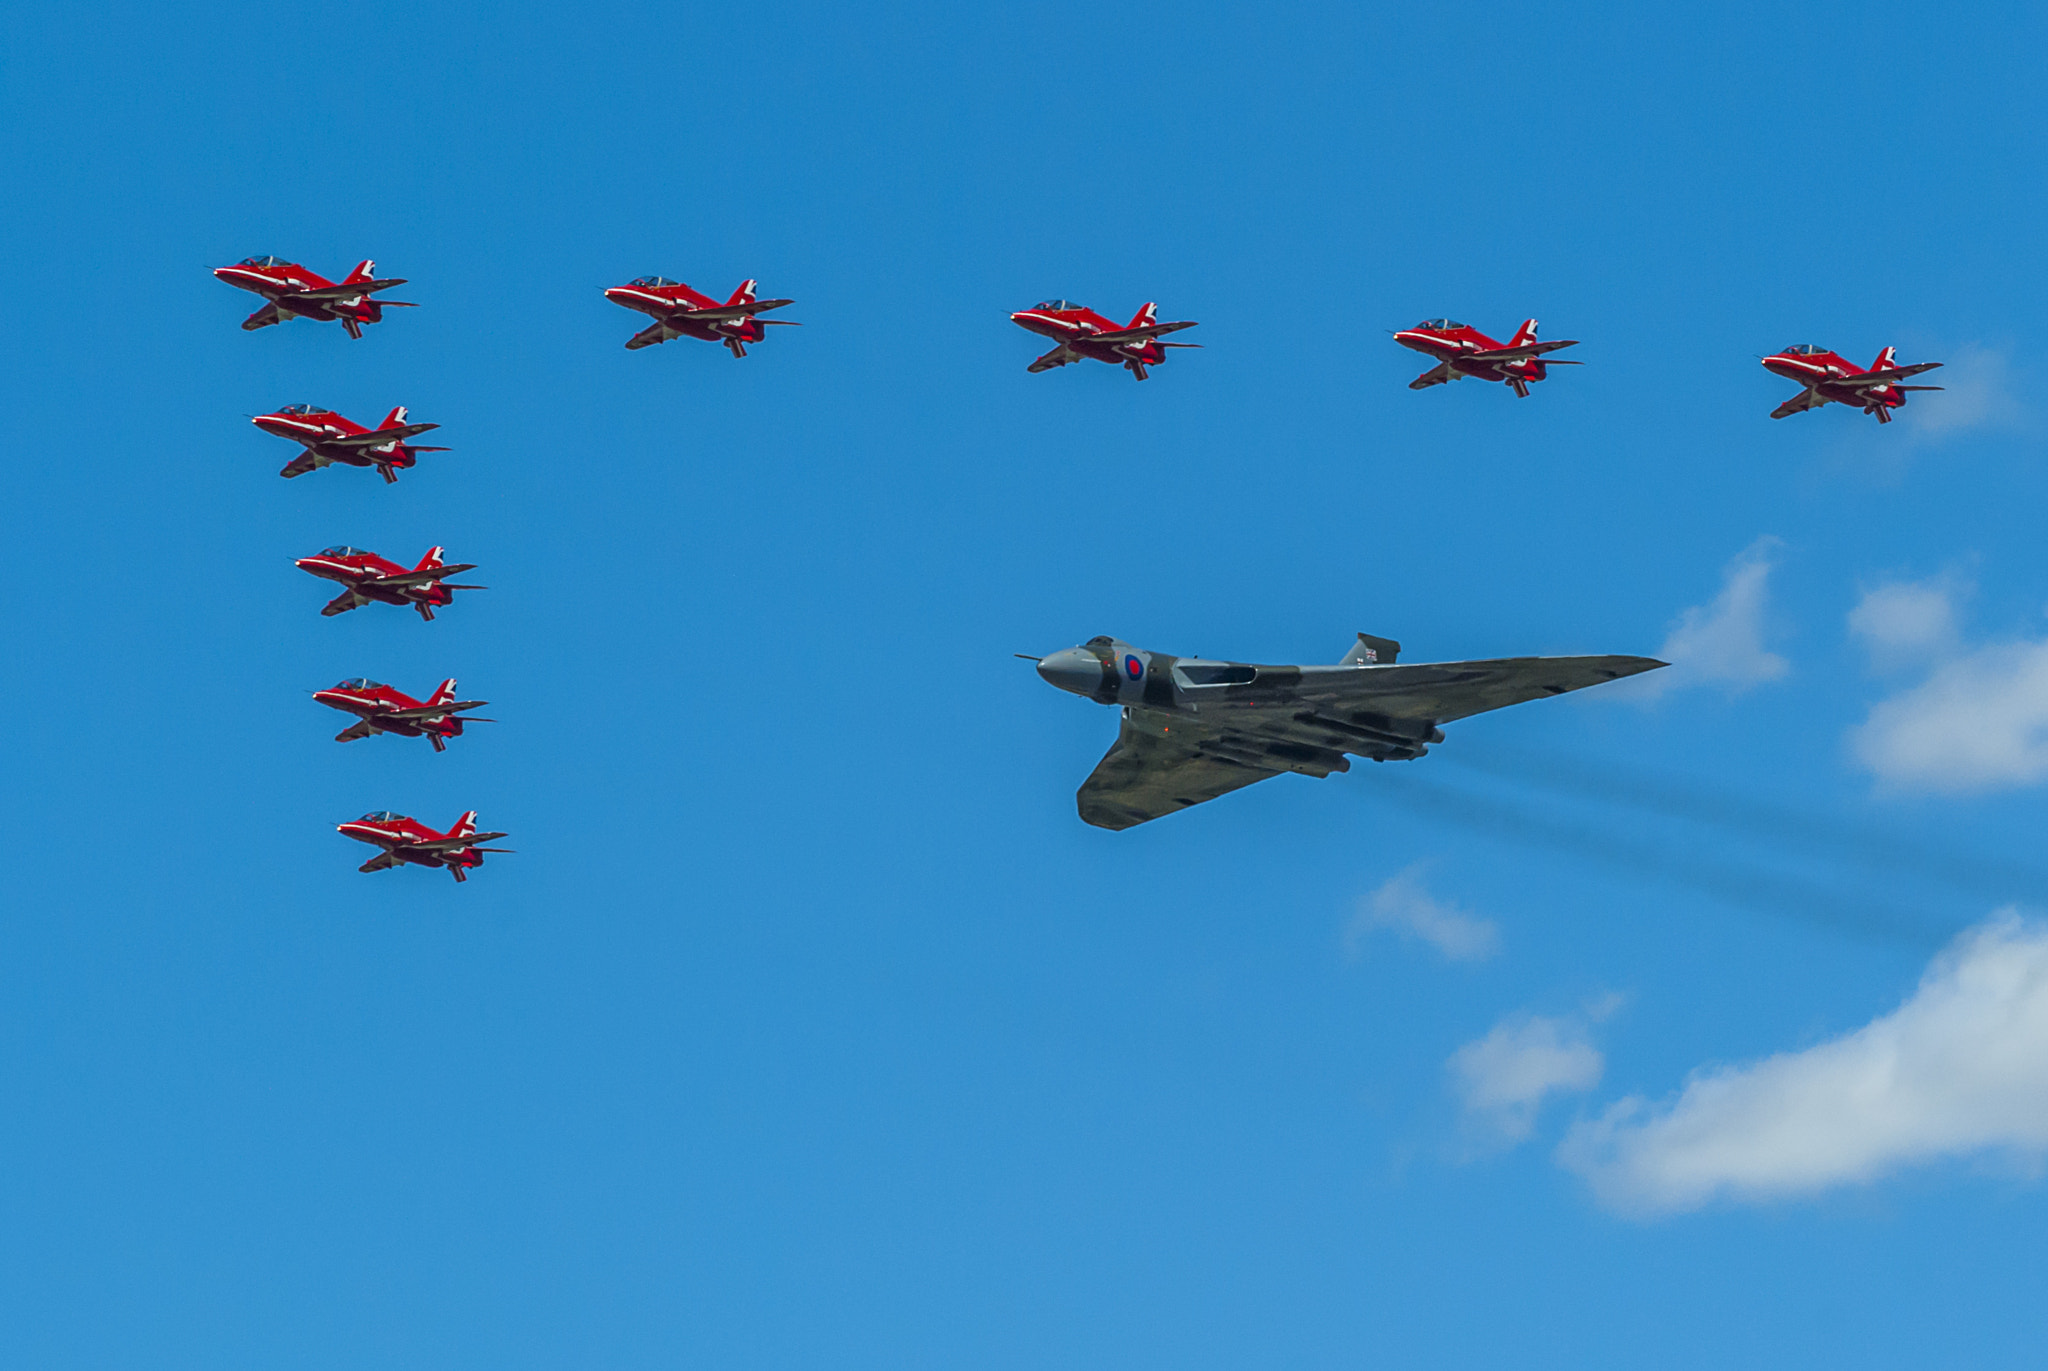 Sony Alpha DSLR-A200 sample photo. Vulcan bomber with red arrows escort photography